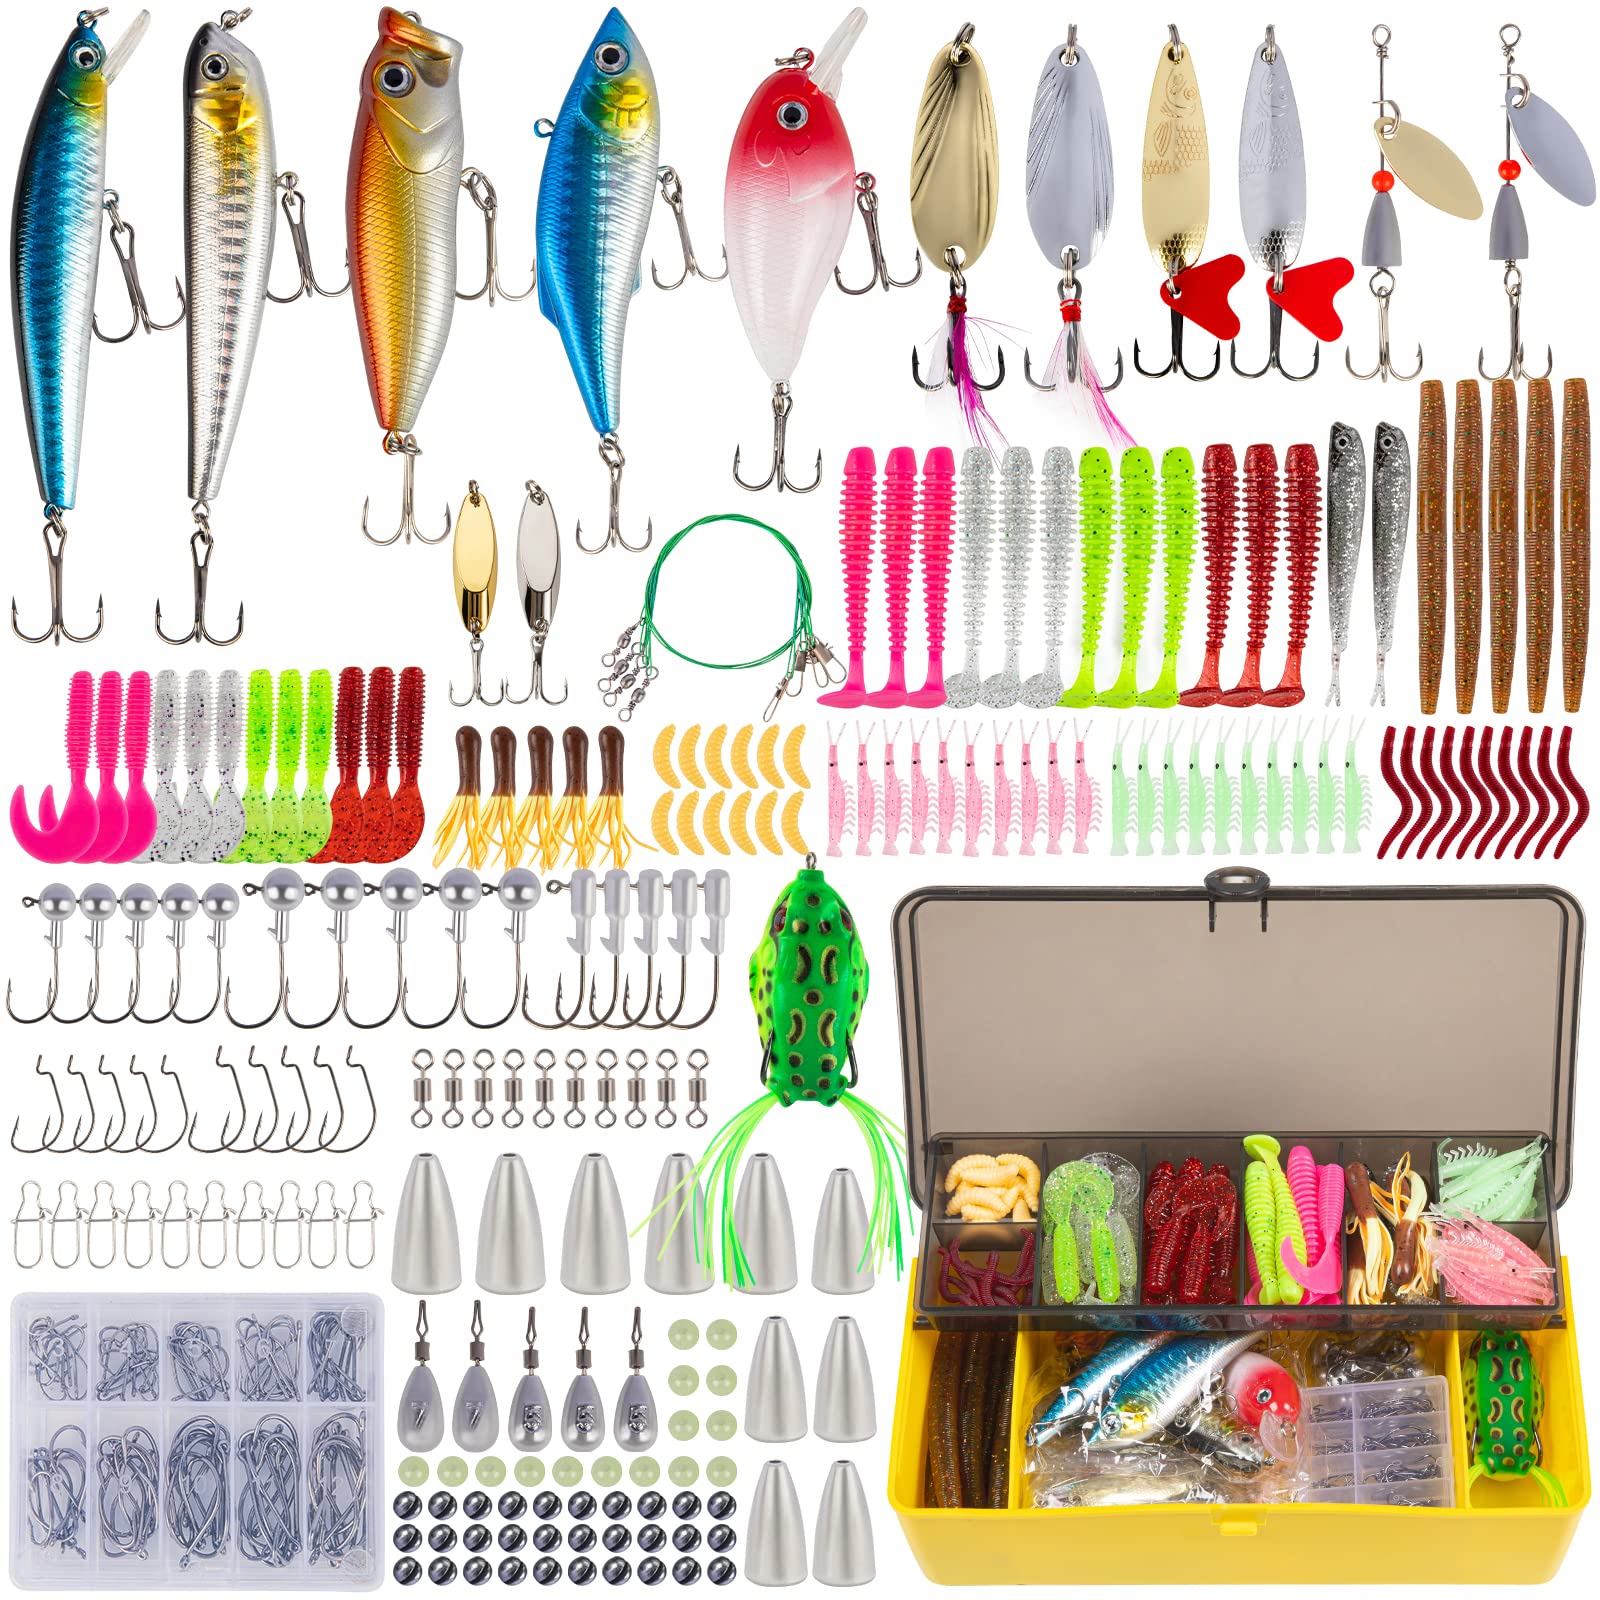 GOANDO Fishing Lures Fishing Gear Tackle Box Fishing Attractantsfor Bass  Trout Salmon Fishing Accessories Including Spoon